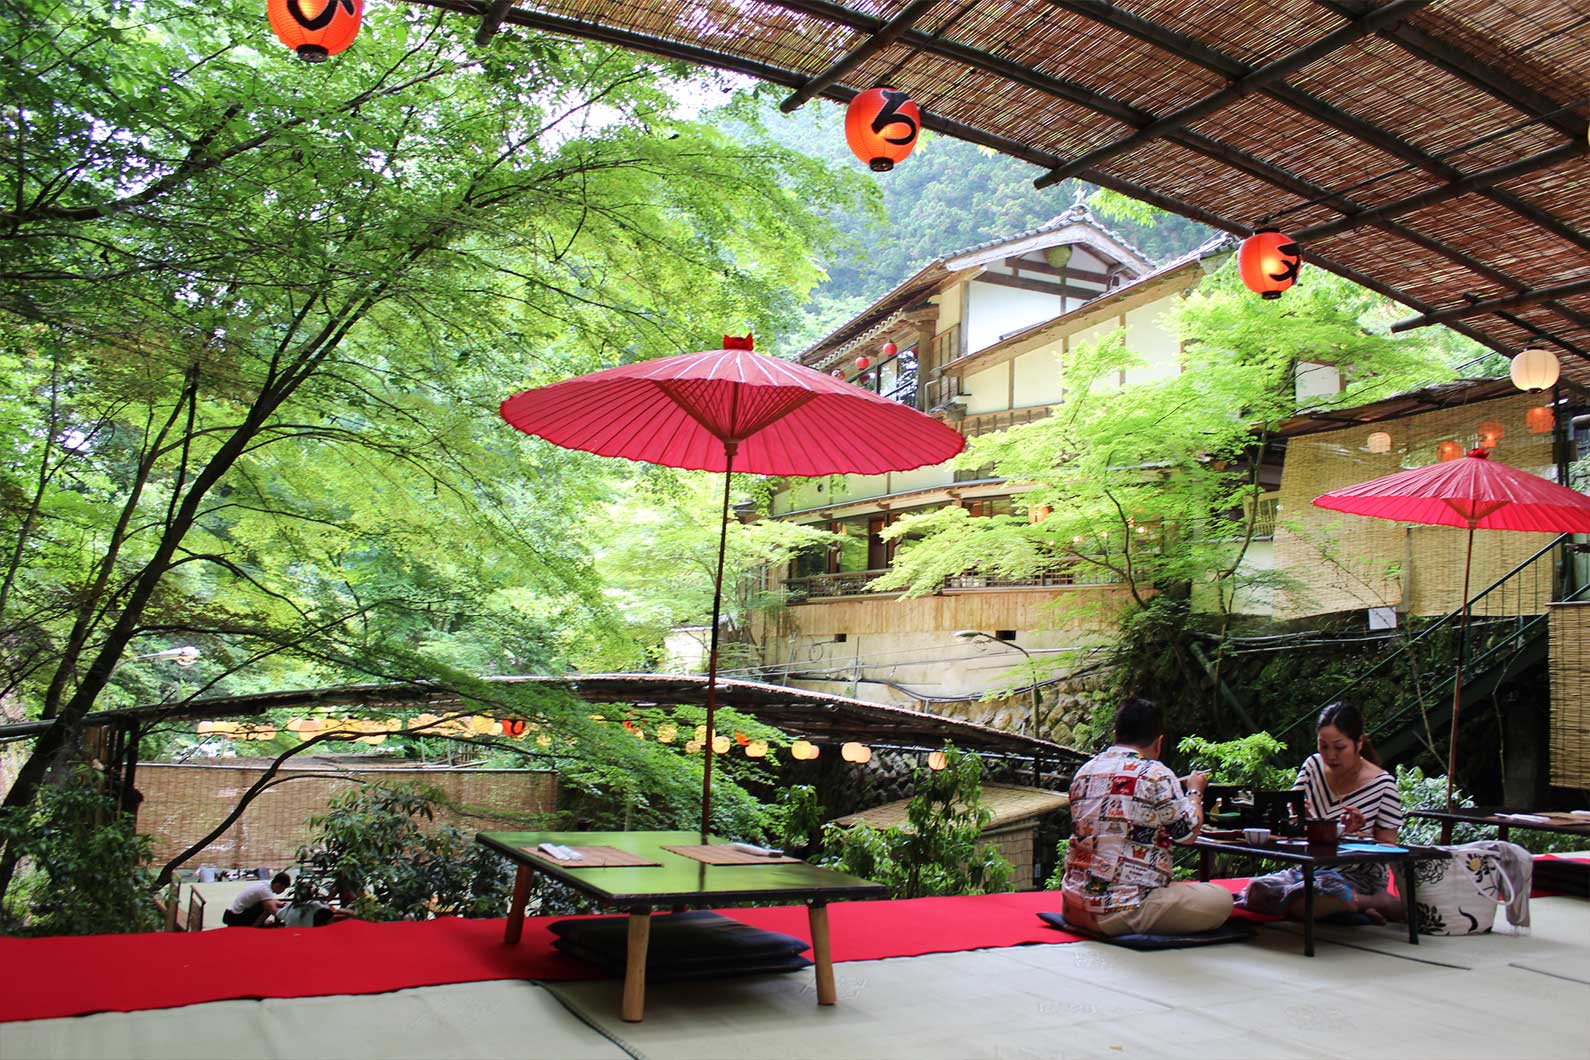 Japanese waterfall restaurant with red lanterns